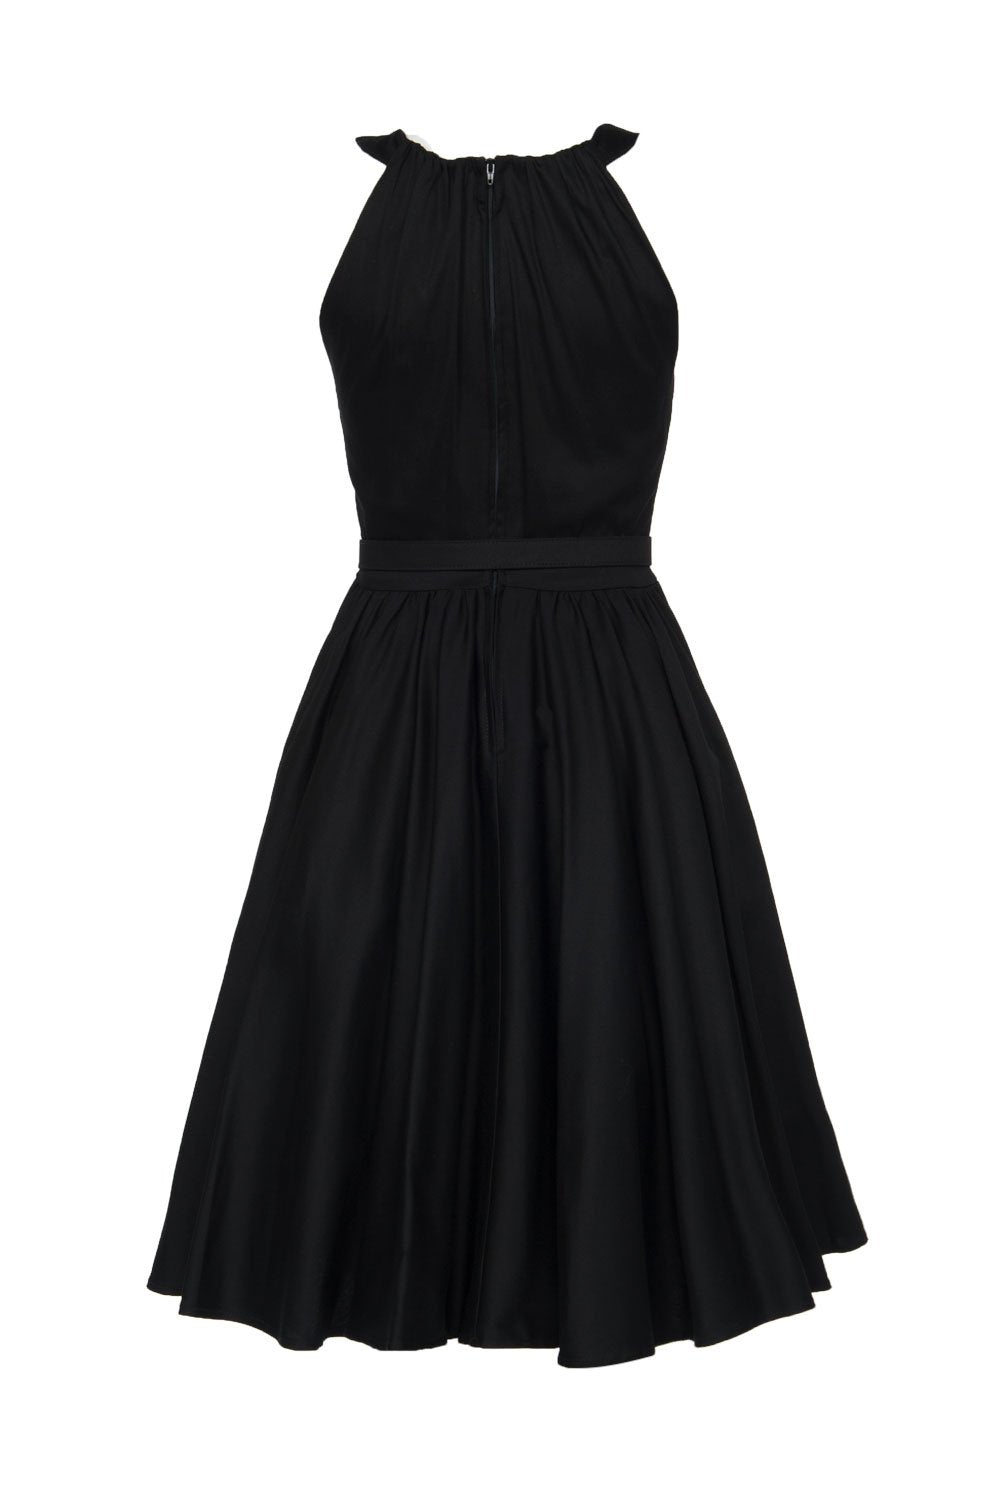 Pinup Couture Harley Dress in Black